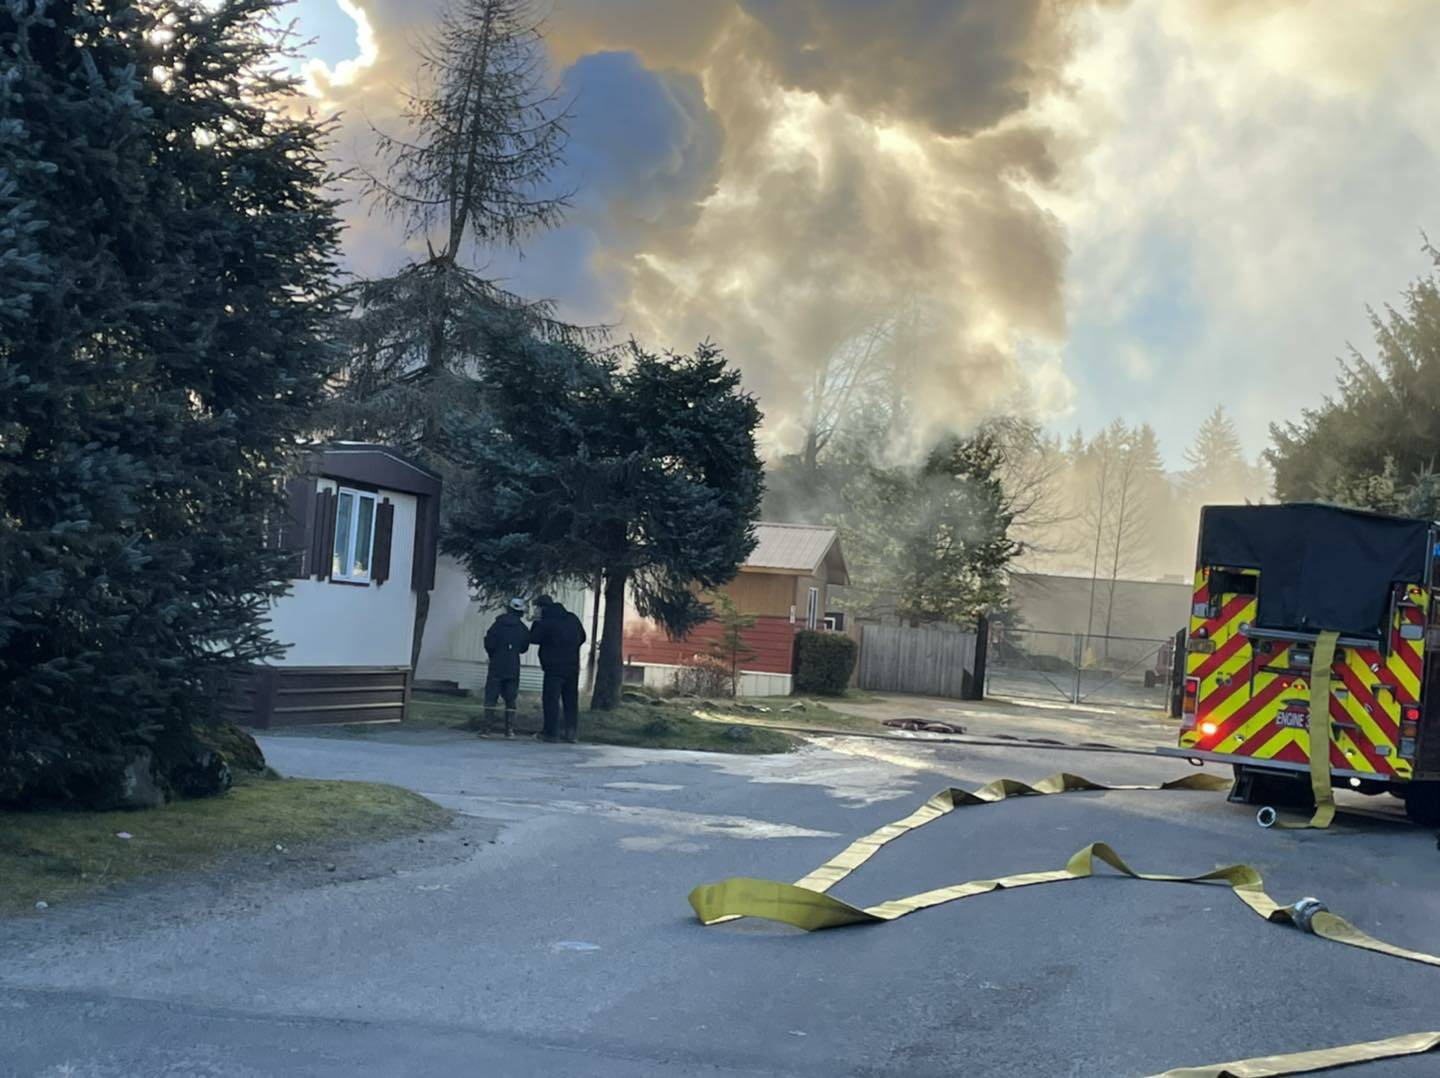 CCFR firefighters working to extinguish a fire at a mobile home in Sprucewood Park on Monday morning. One man was reported to have escaped the fire with minor injuries and was taken to Bartlett Regional Hospital. (Courtesy Photo / CCFR)